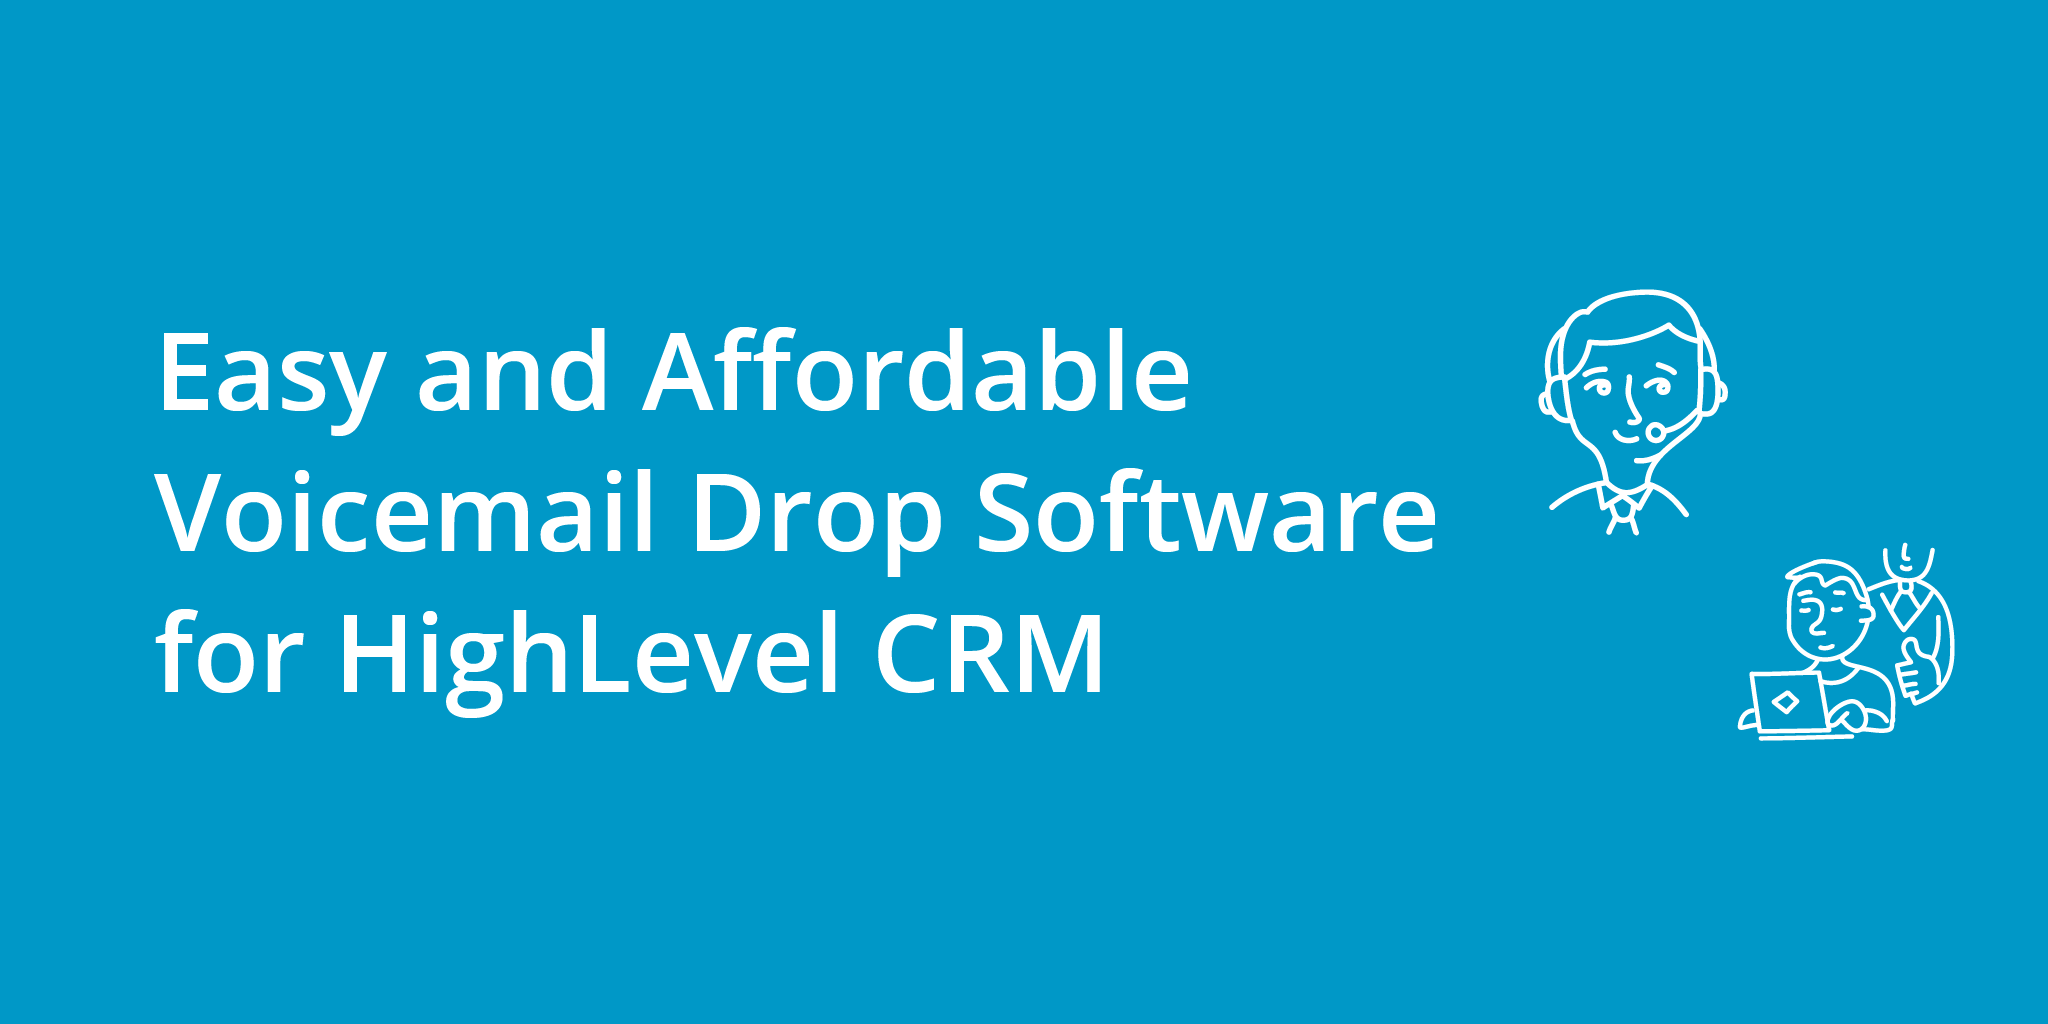 Easy and Affordable Voicemail Drop Software for HighLevel CRM